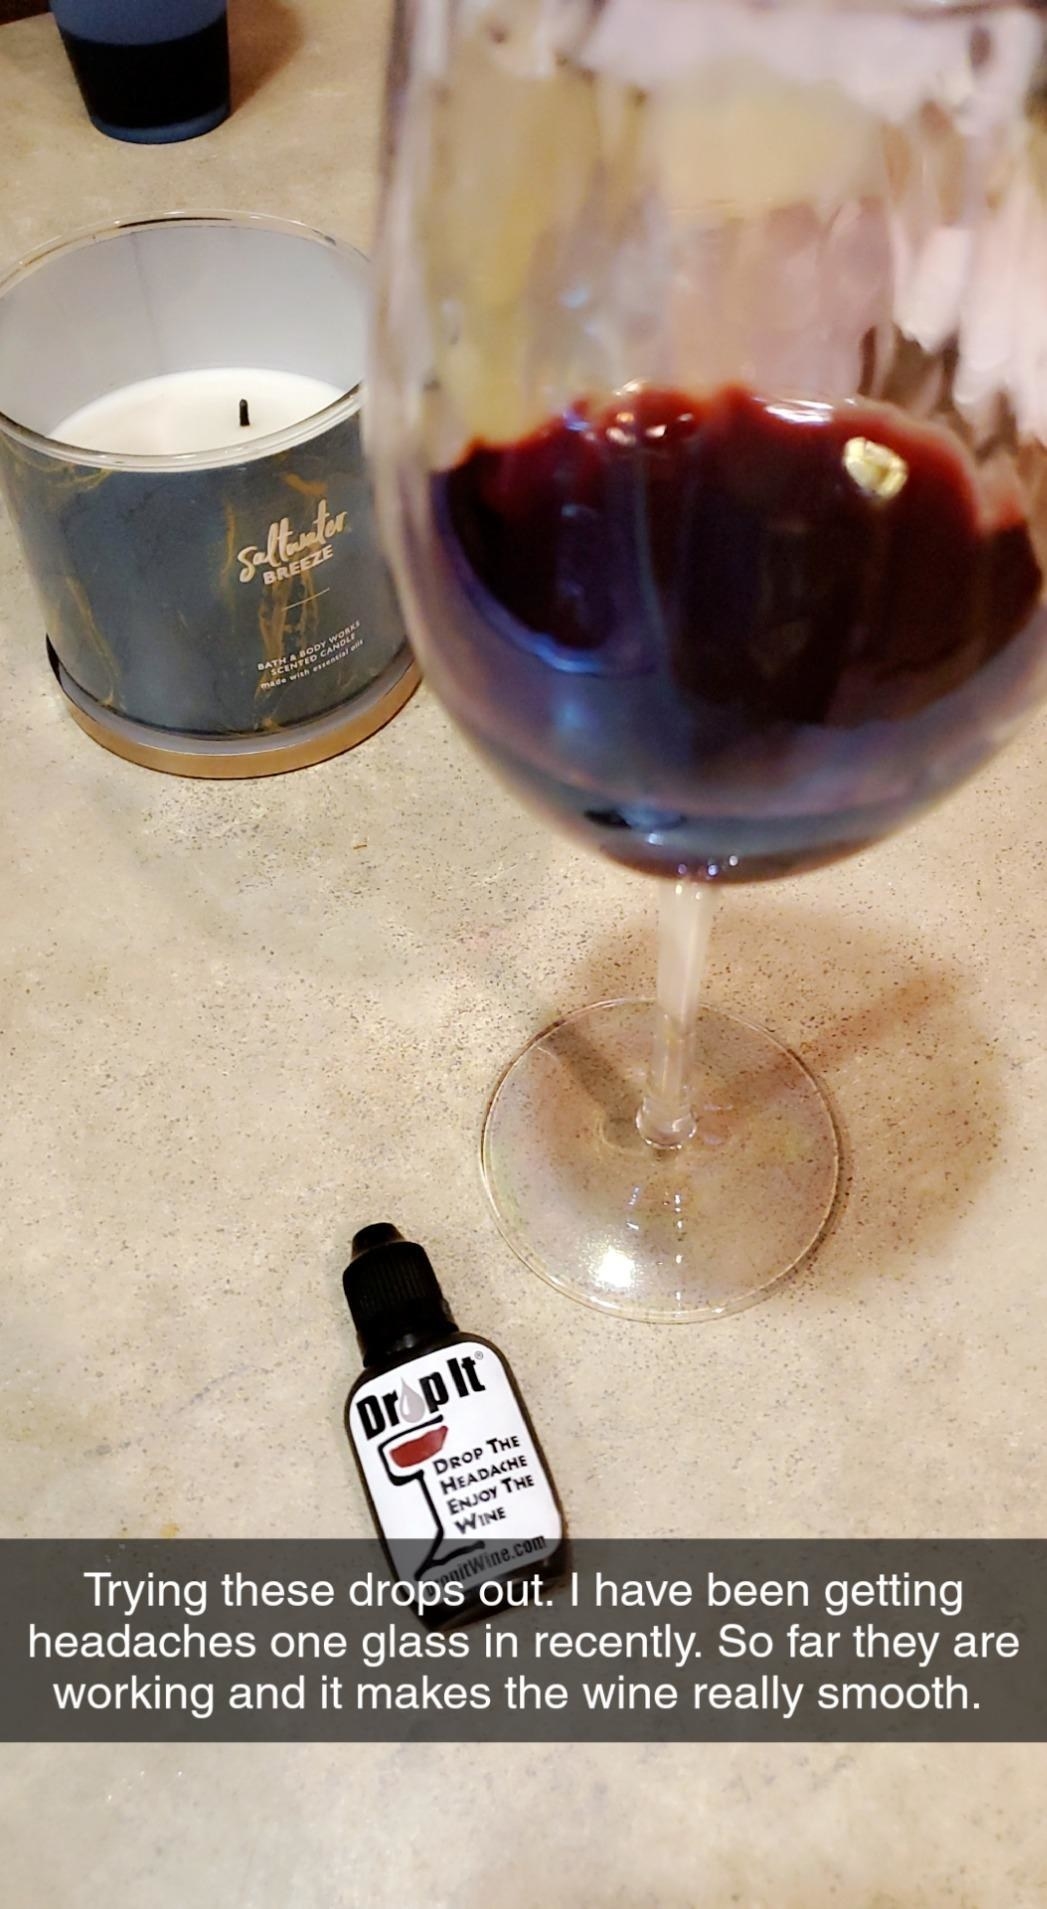 Reviewer&#x27;s photo showing glass of red wine and Drop it bottle on counter. Photo captioned by reviewer &quot;trying these drops out. I have been getting headaches one glass in recently. So far they are working and it makes the wine really smooth.&quot;